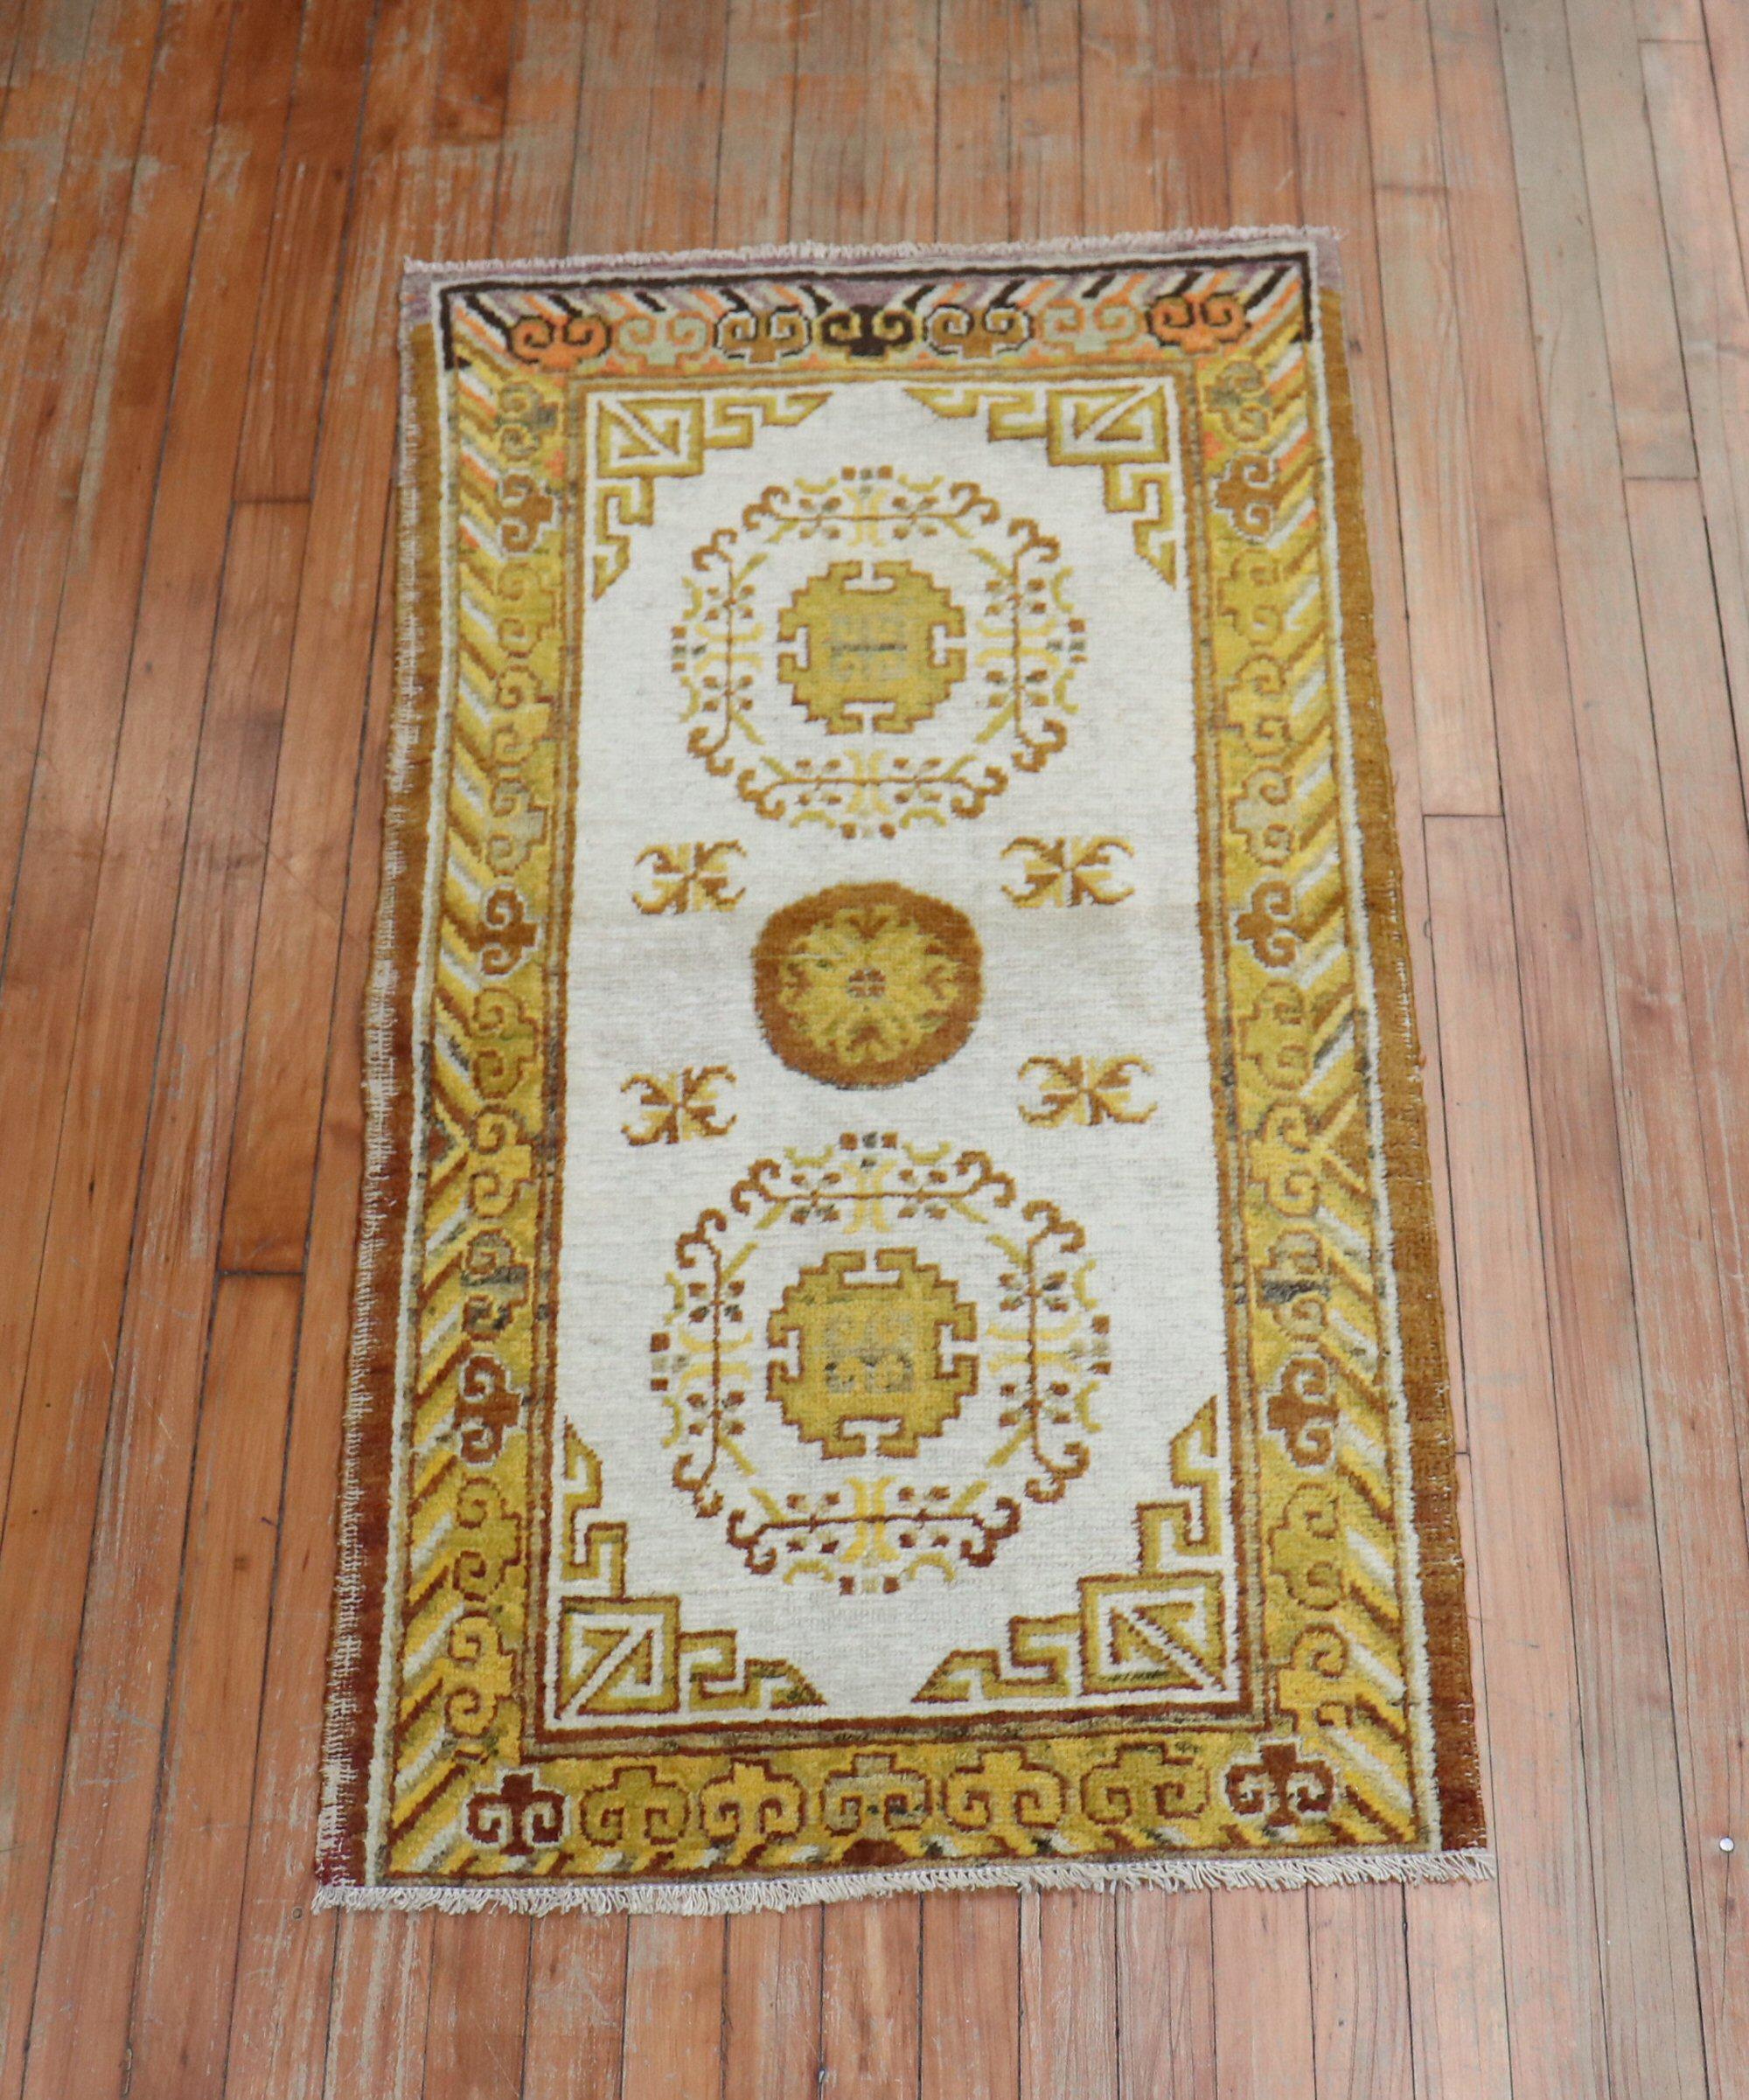 A late 19th century Khotan scatter rug. Field is ivory, gold and brown main accent colors. 1 end border has pops of lavender and orange.

Measures: 2'4